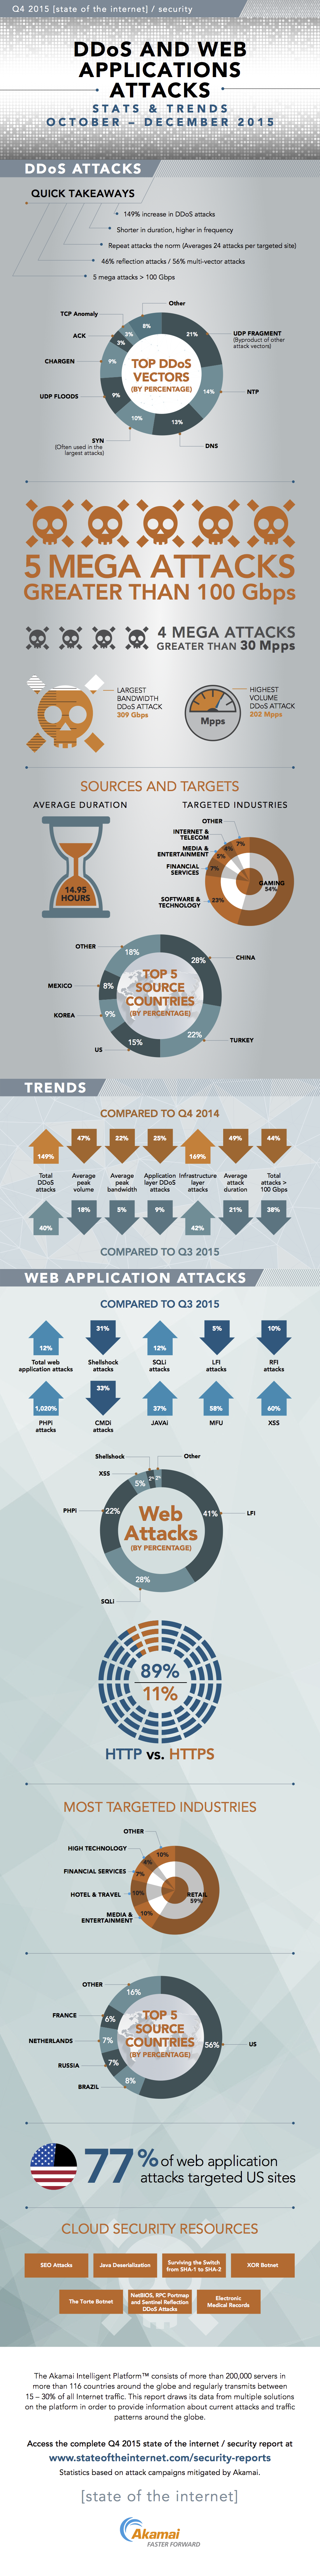 q4-2015-security-report-ddos-stats-trends-analysis-infographic%202